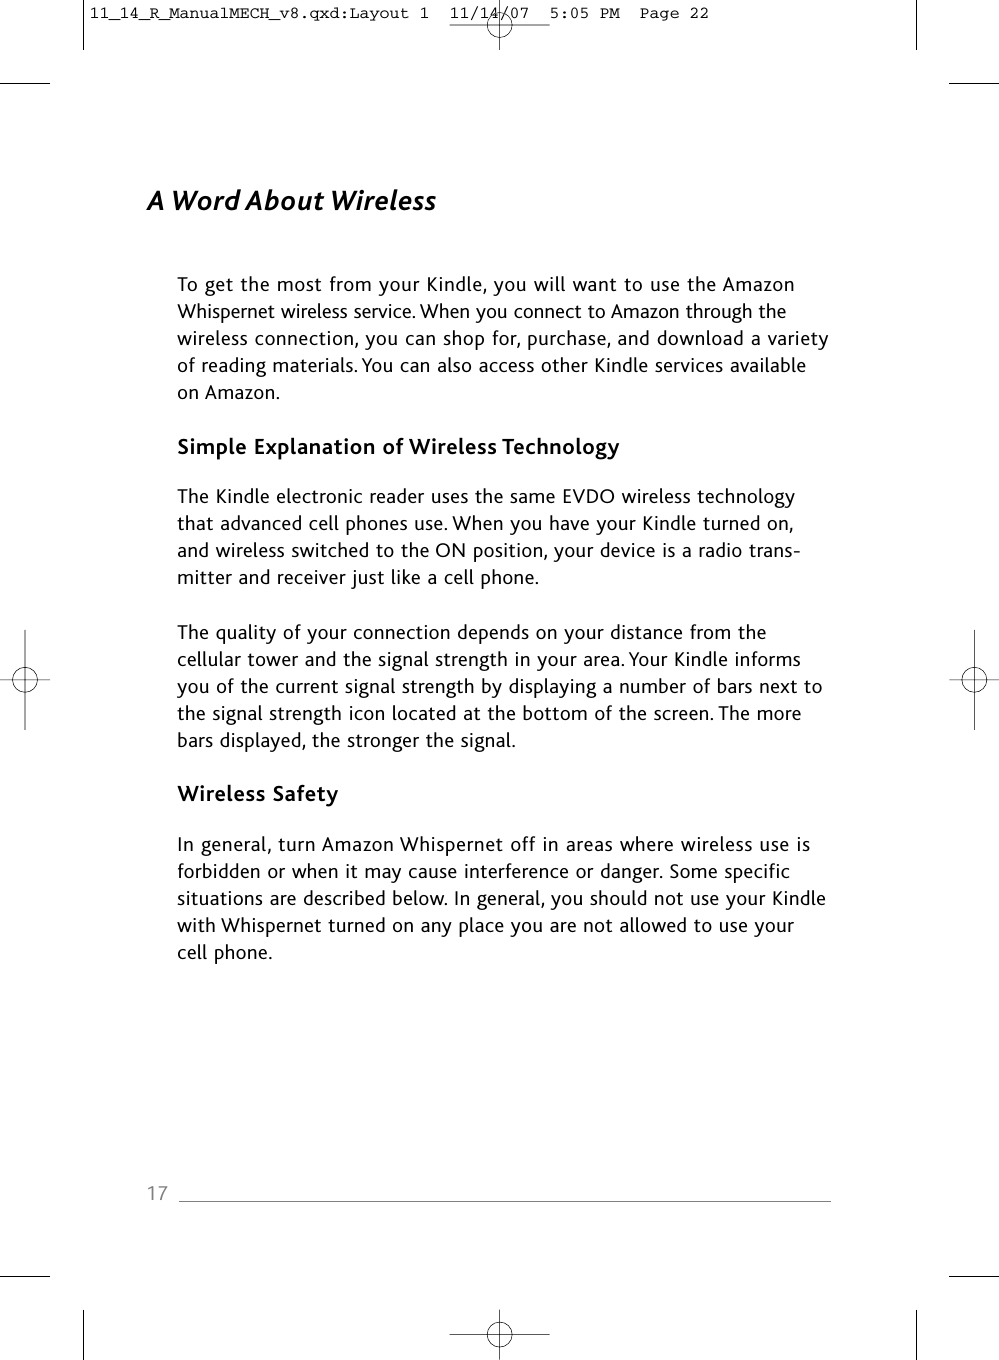 A Word About WirelessTo get the most from your Kindle, you will want to use the Amazon Whispernet wireless service. When you connect to Amazon through the wireless connection, you can shop for, purchase, and download a variety of reading materials. You can also access other Kindle services available on Amazon.Simple Explanation of Wireless TechnologyThe Kindle electronic reader uses the same EVDO wireless technology that advanced cell phones use. When you have your Kindle turned on, and wireless switched to the ON position, your device is a radio trans-mitter and receiver just like a cell phone.The quality of your connection depends on your distance from the cellular tower and the signal strength in your area. Your Kindle informs you of the current signal strength by displaying a number of bars next to the signal strength icon located at the bottom of the screen. The more bars displayed, the stronger the signal.Wireless SafetyIn general, turn Amazon Whispernet off in areas where wireless use is forbidden or when it may cause interference or danger. Some specific situations are described below. In general, you should not use your Kindlewith Whispernet turned on any place you are not allowed to use your cell phone.1711_14_R_ManualMECH_v8.qxd:Layout 1  11/14/07  5:05 PM  Page 22